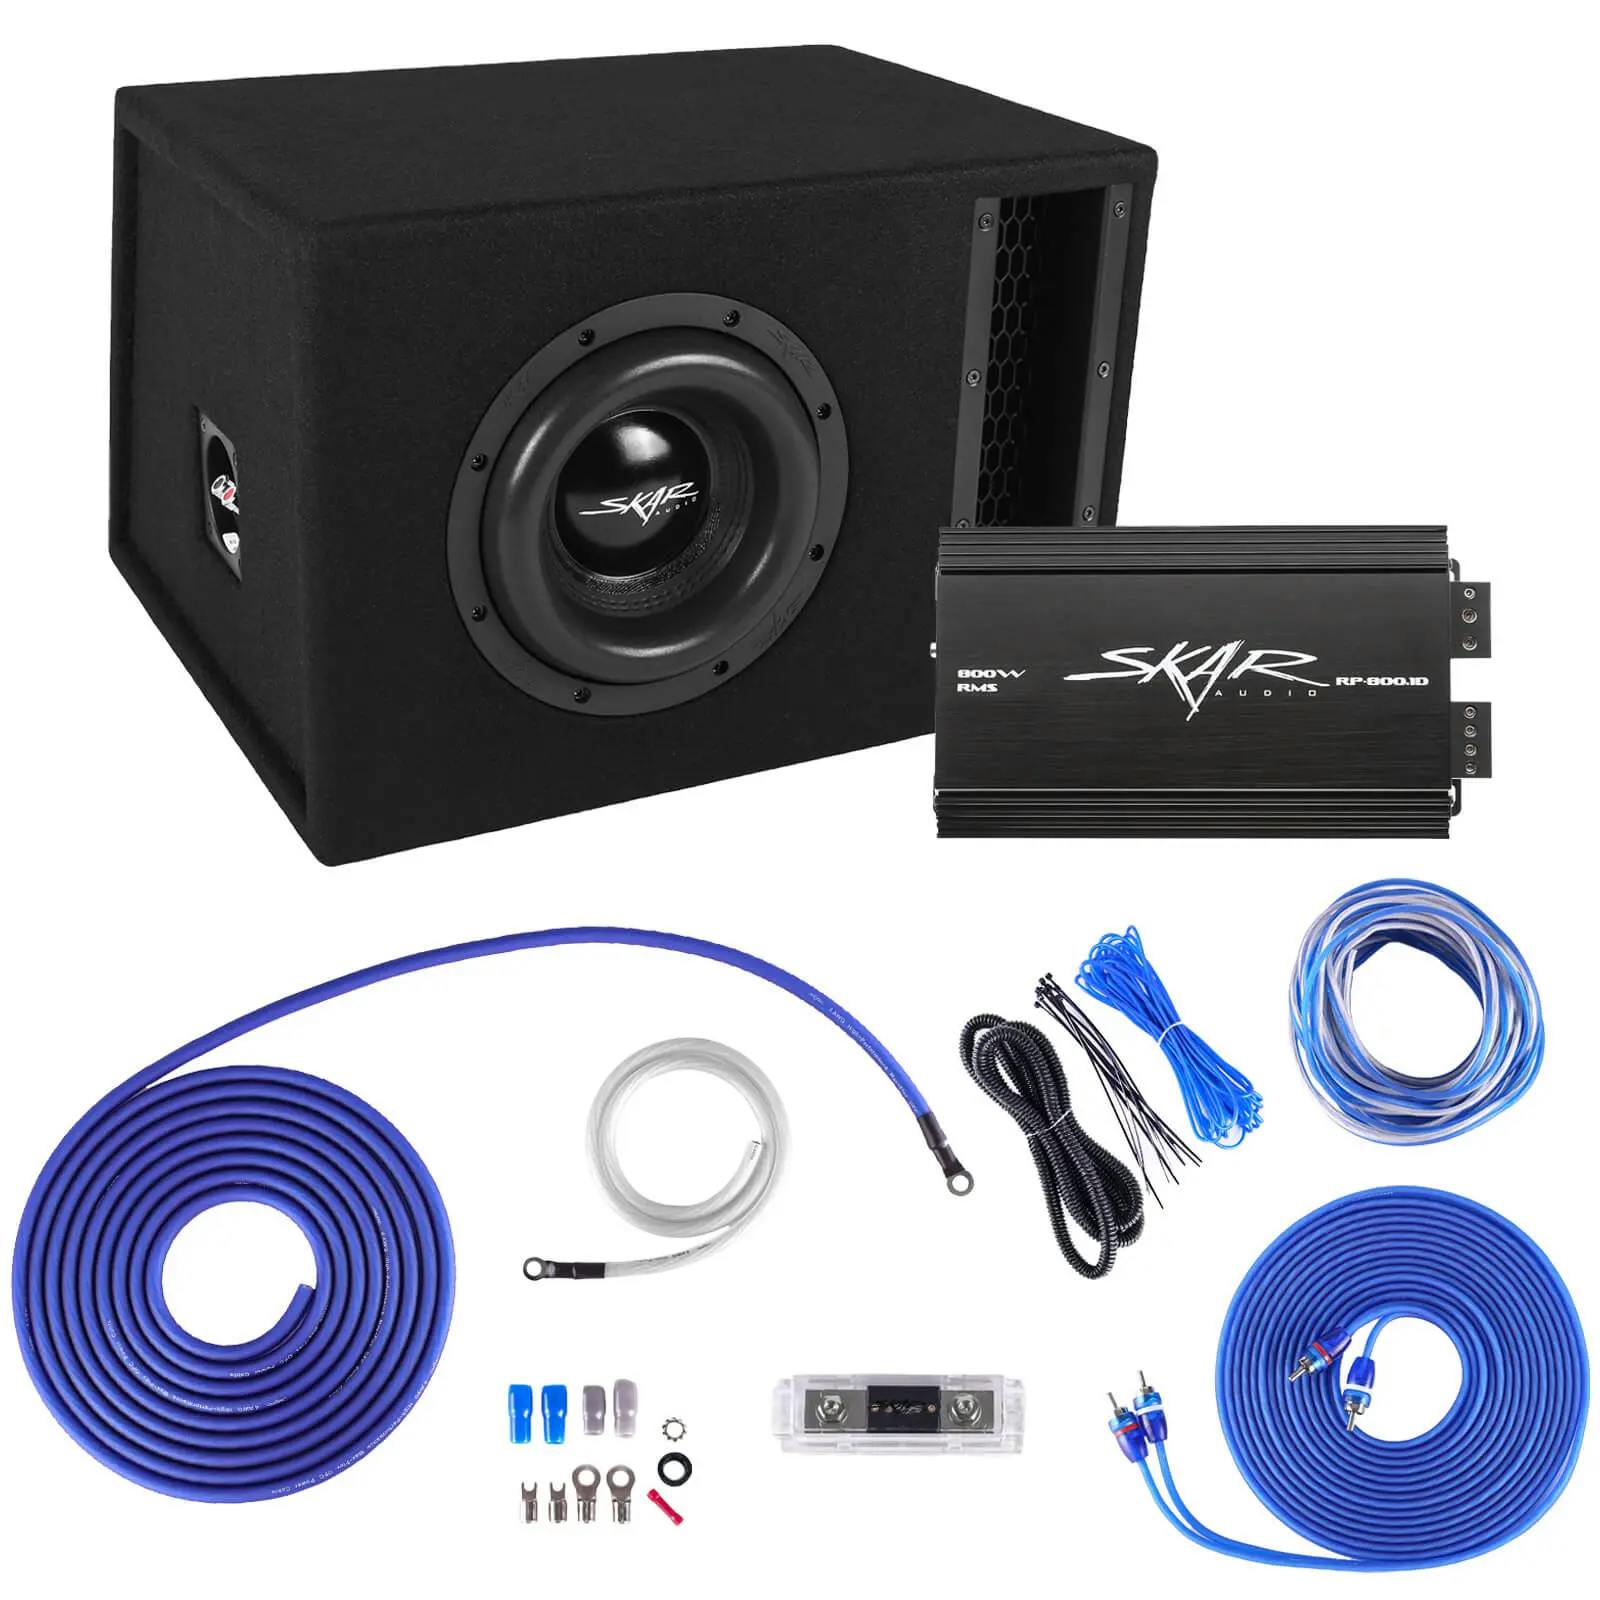 Featured Product Photo for Single 8" 1,200 Watt EVL Series Complete Subwoofer Package with Vented Enclosure and Amplifier